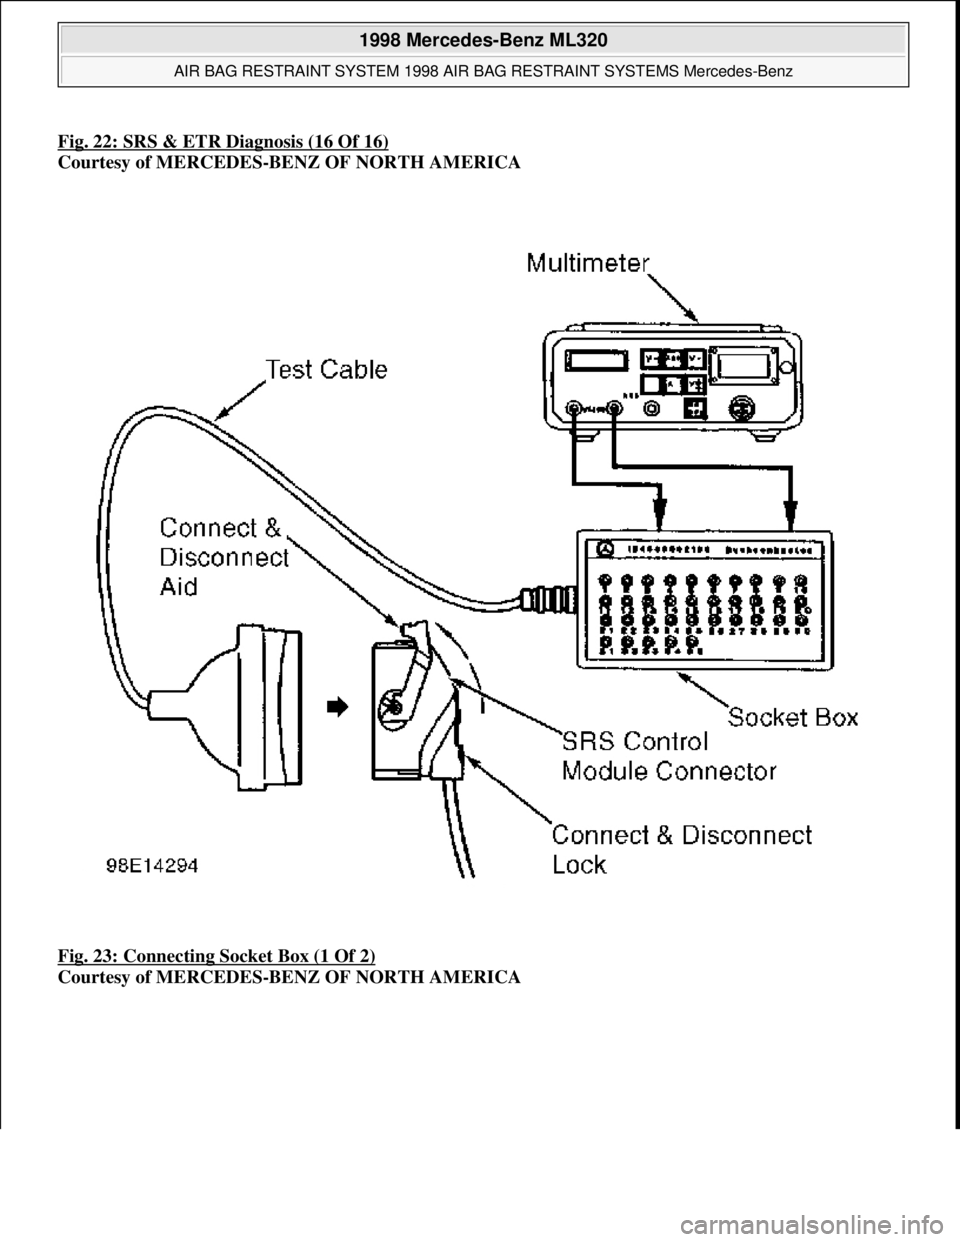 MERCEDES-BENZ ML350 1997  Complete Owners Guide Fig. 22: SRS & ETR Diagnosis (16 Of 16)
Courtesy of MERCEDES-BENZ OF NORTH AMERICA 
Fig. 23: Connecting Socket Box (1 Of 2)
 
Courtesy of MERCEDES-BENZ OF NORTH AMERICA
 
1998 Mercedes-Benz ML320 
AIR